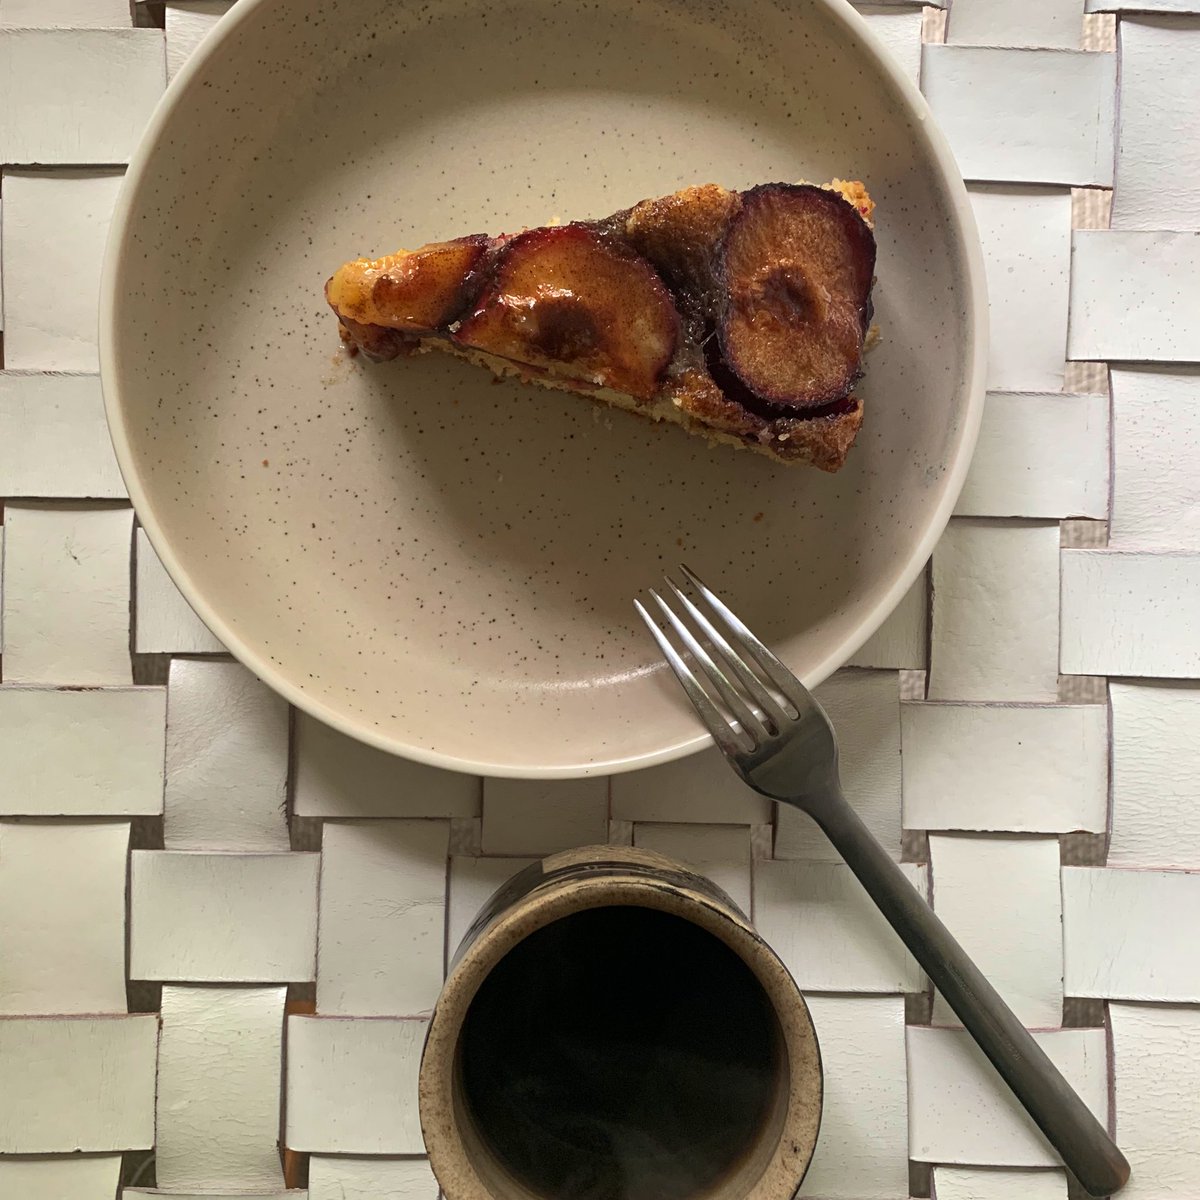 this is plum cake and a cup of coffee from this morning reheated on the stove